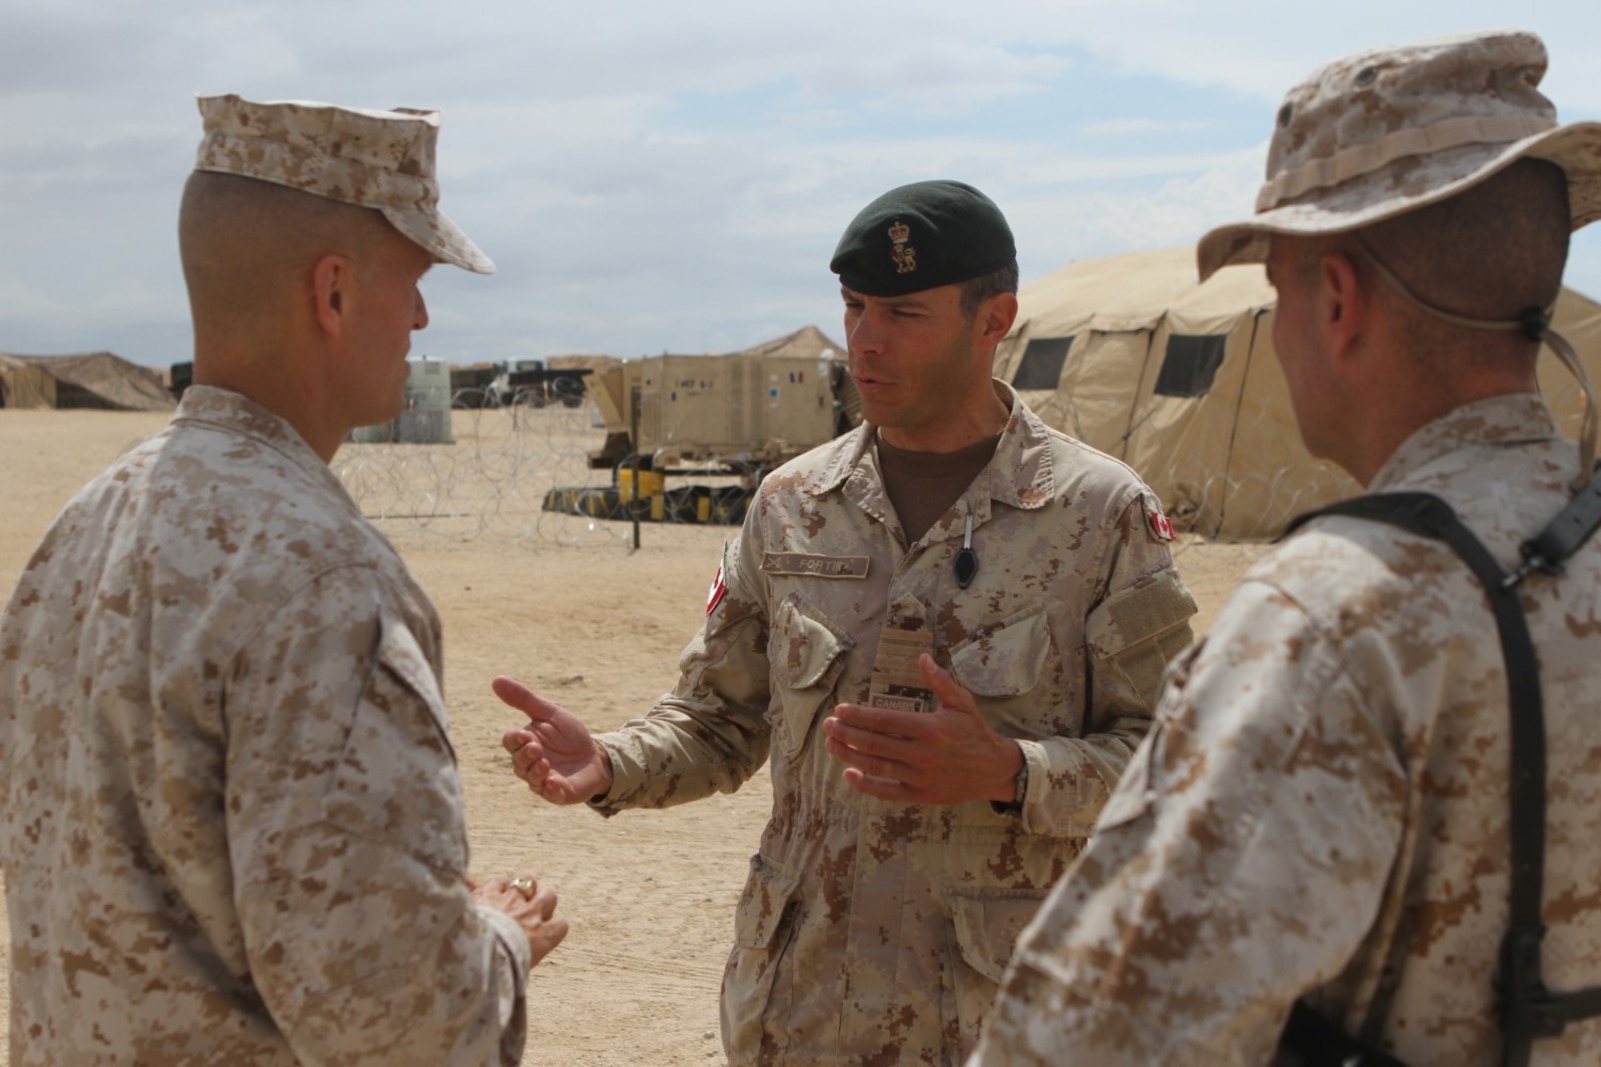 Col. Dani Fortin, commander of adjacent Canadian Forces, 5 Canadian Mechanized Brigade Group, discusses operations to be conducted in the following weeks with Brig. Gen. Carl E. Mundy III, commanding general of 1st Marine Expeditionary Brigade, during Large Scale Exercise 2014 aboard Marine Corps Air Ground Combat Center Twentynine Palms, Calif., Aug. 3, 2014. LSE-14 is a bilateral training exercise being conducted by 1st MEB to build U.S. and Canadian forces’ joint capabilities through live, simulated, and constructive military training activities from Aug. 8-14. (U.S. Marine Corps photo by Lance Cpl. Angel Serna/Released)